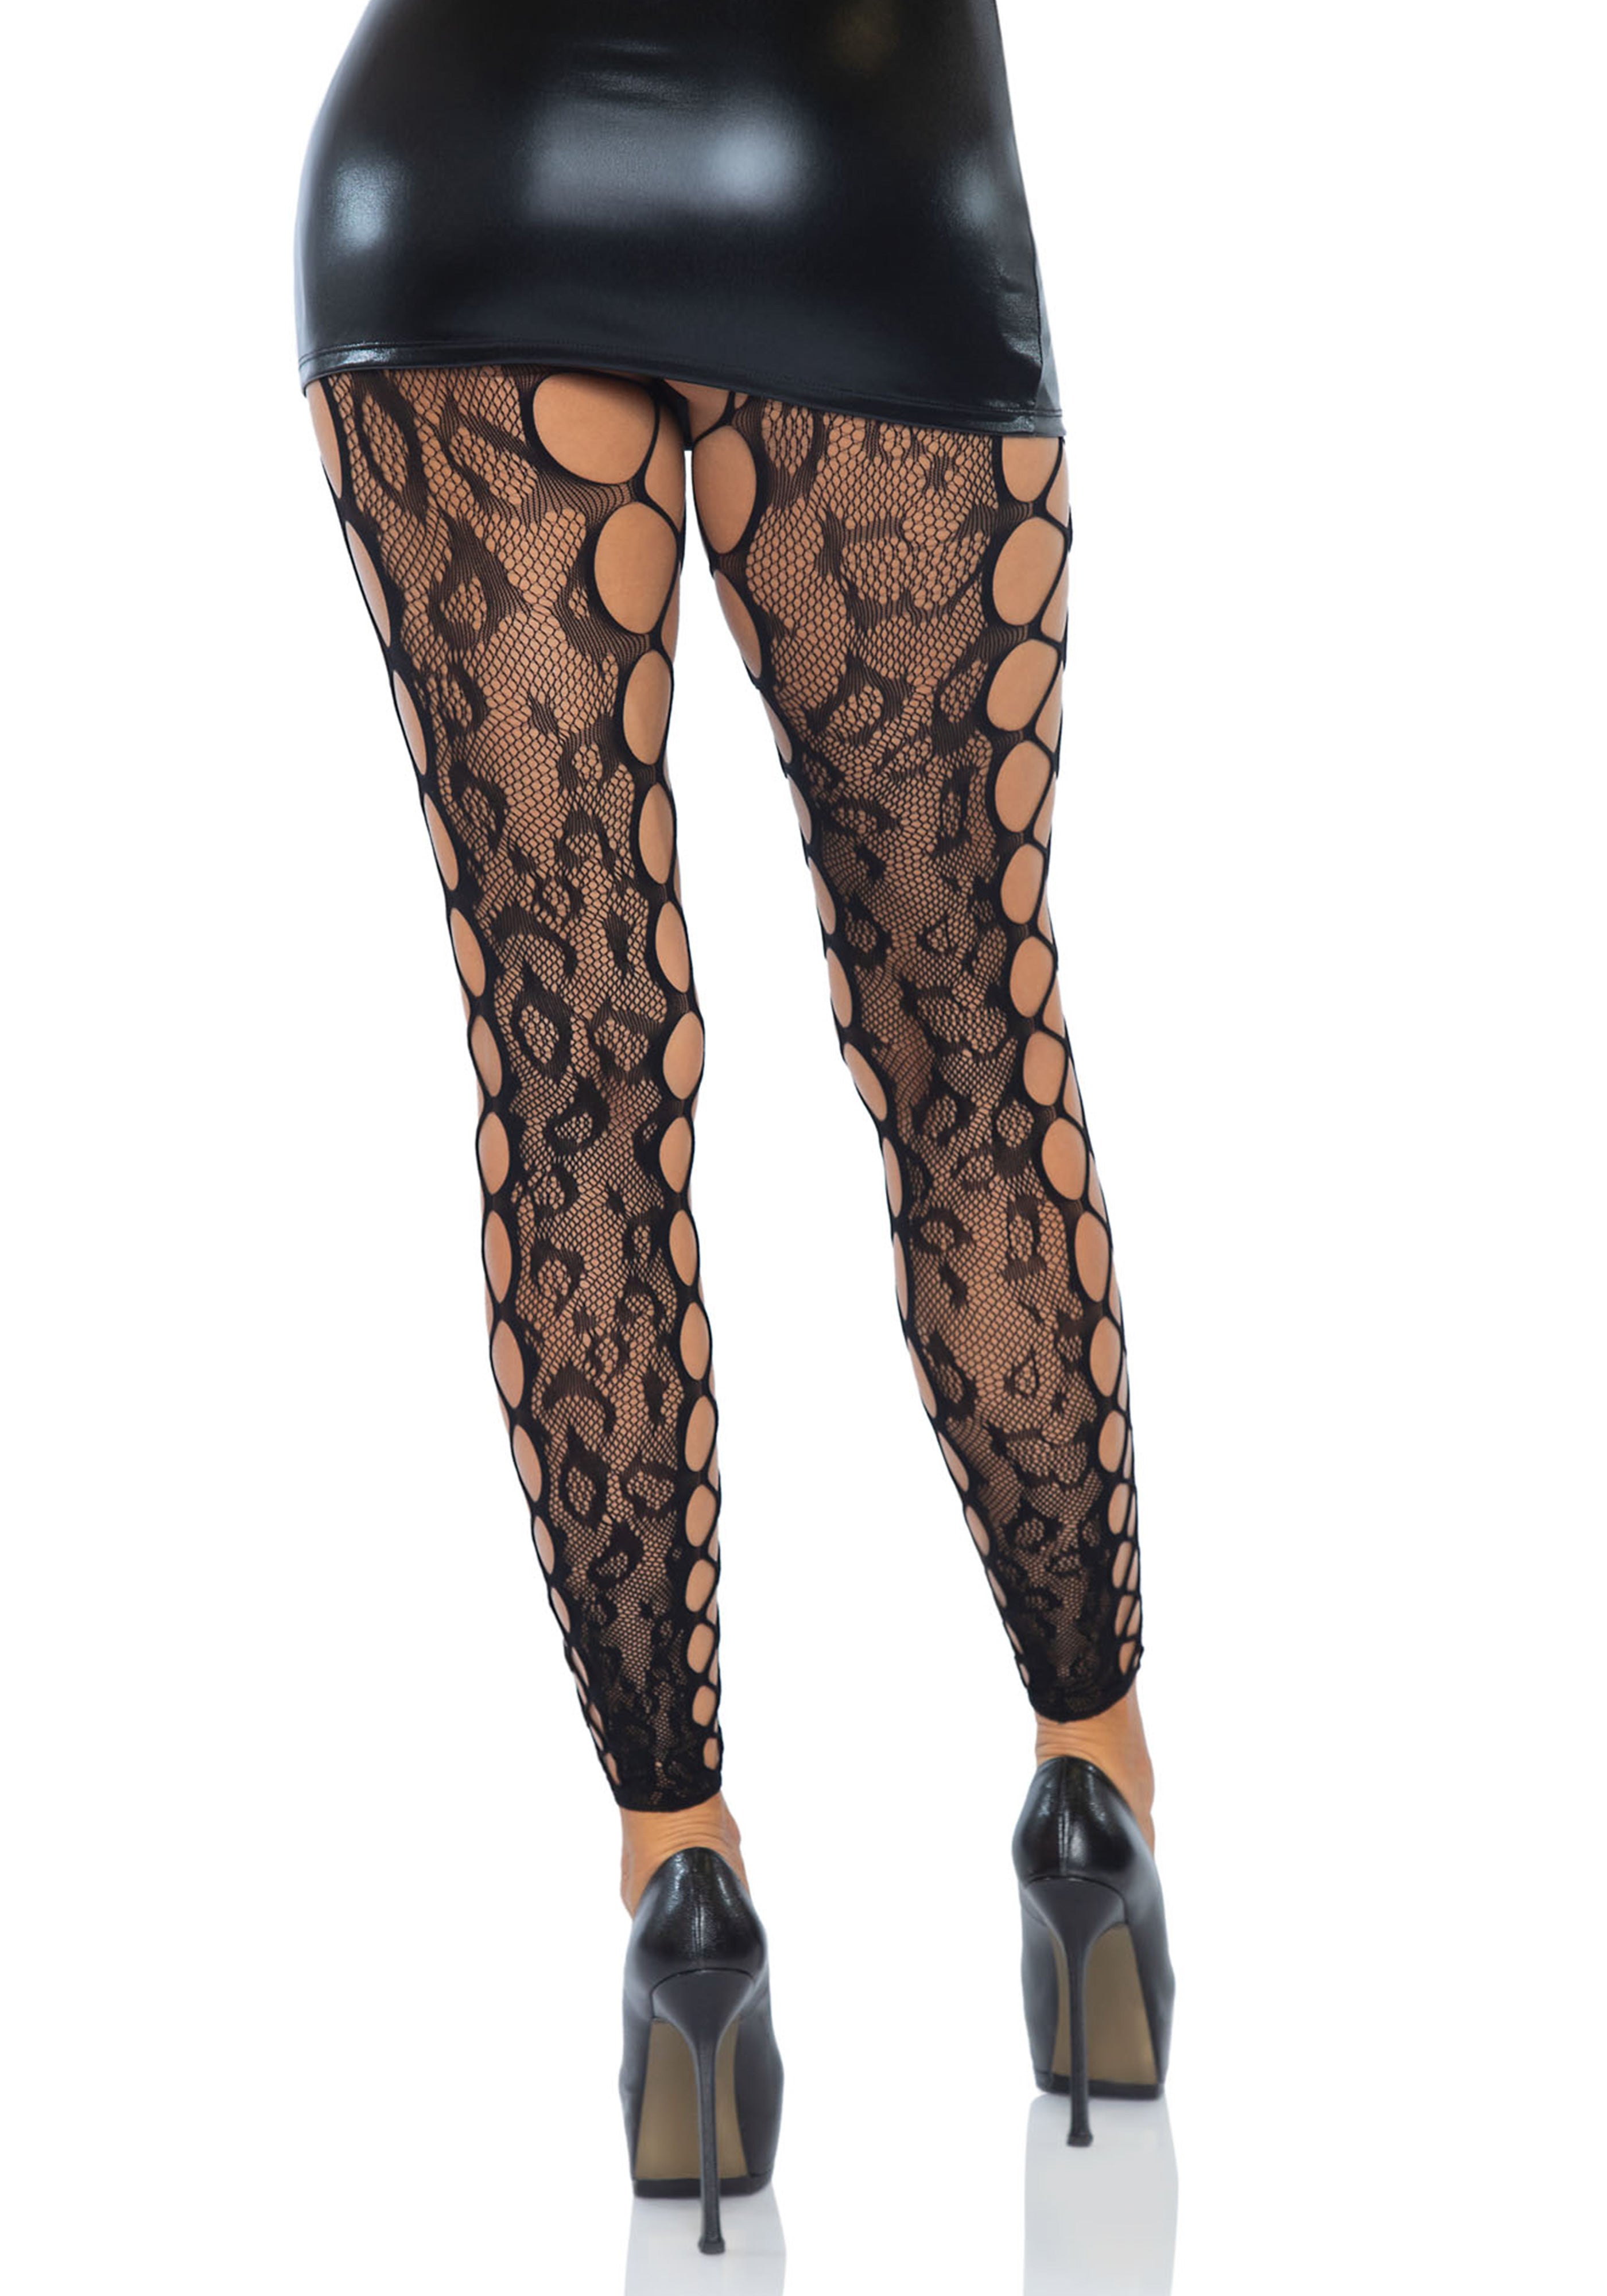 Leg Avenue 7812 Footless crotchless tights